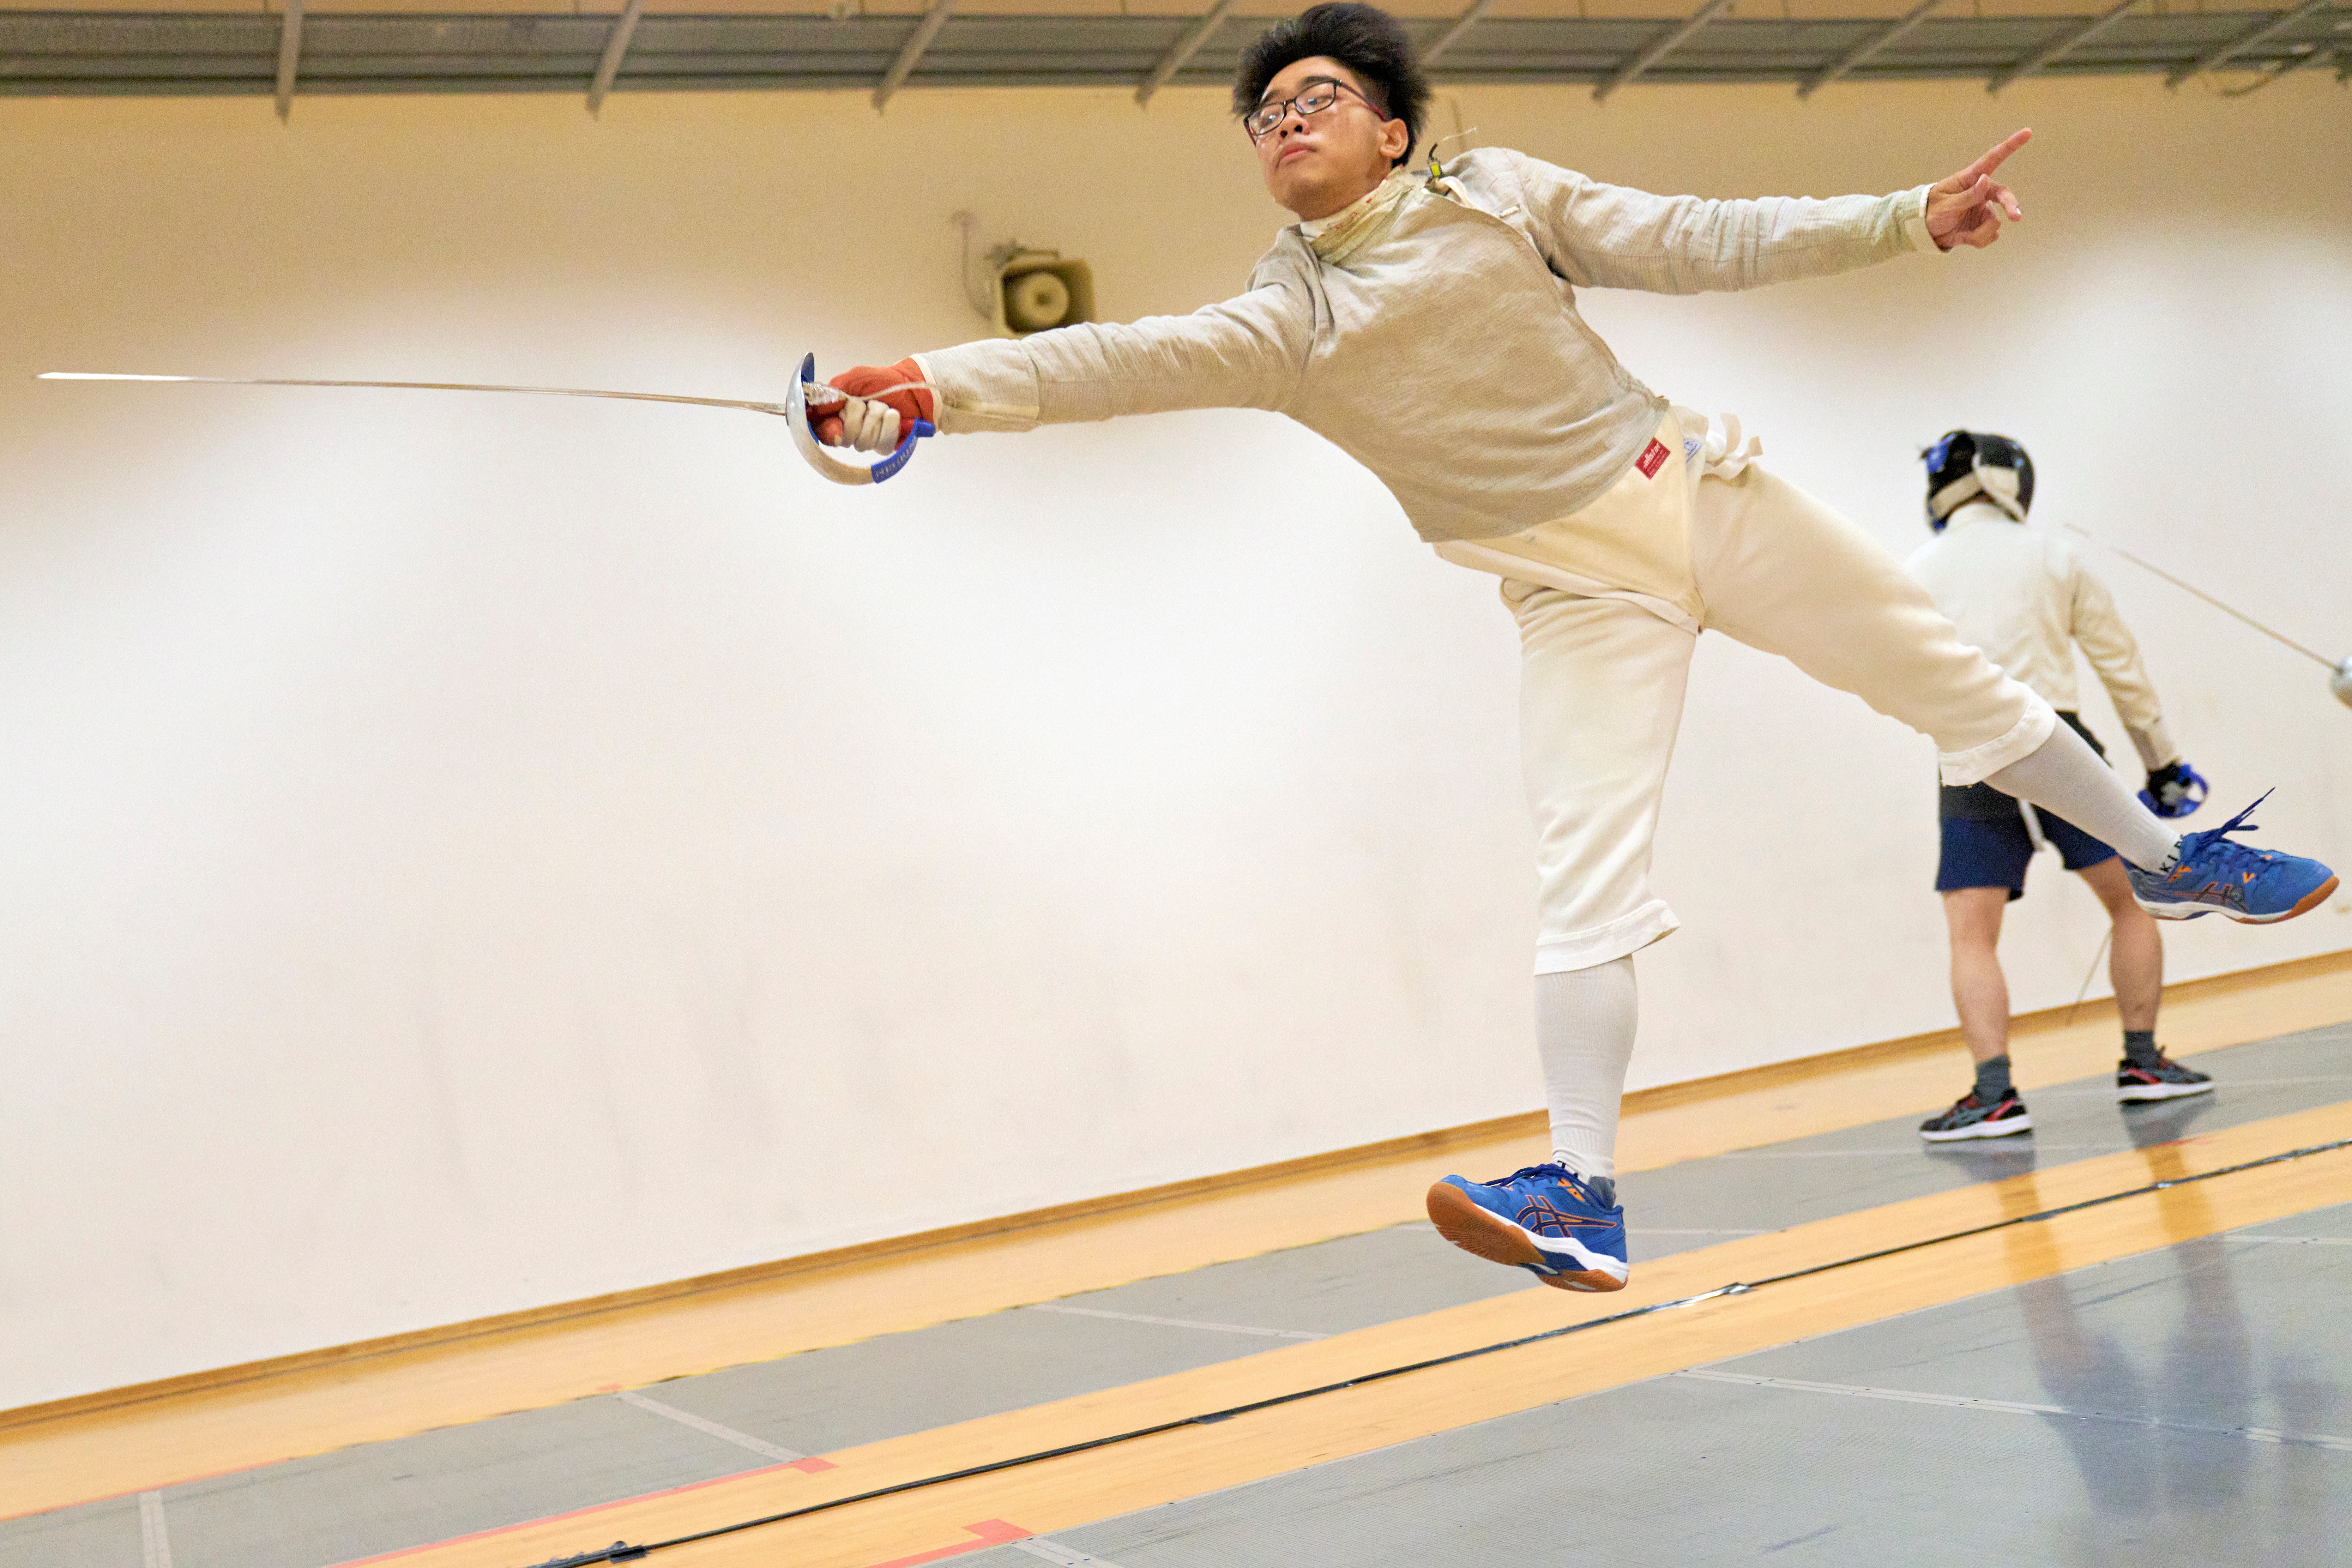 2023_04_20 Fencing Sabre A Div Boys Photo by Eric Koh, Fencer warms up before the match DSC07265